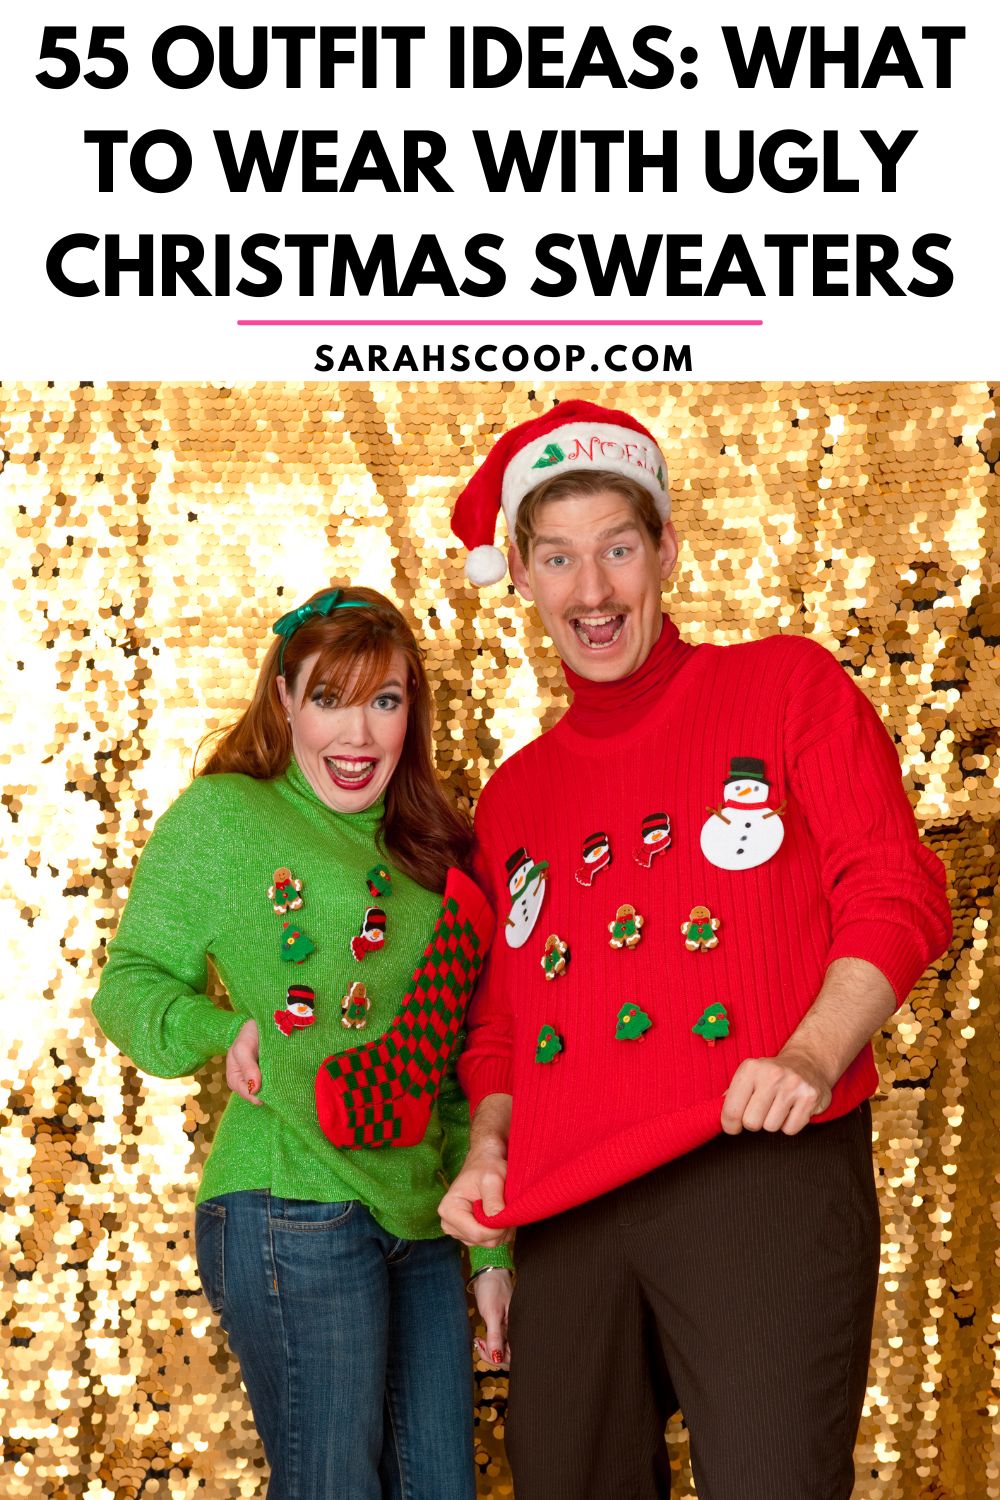 DIY Ugly Christmas Sweater Ideas For Couples! - Creative Fashion Blog